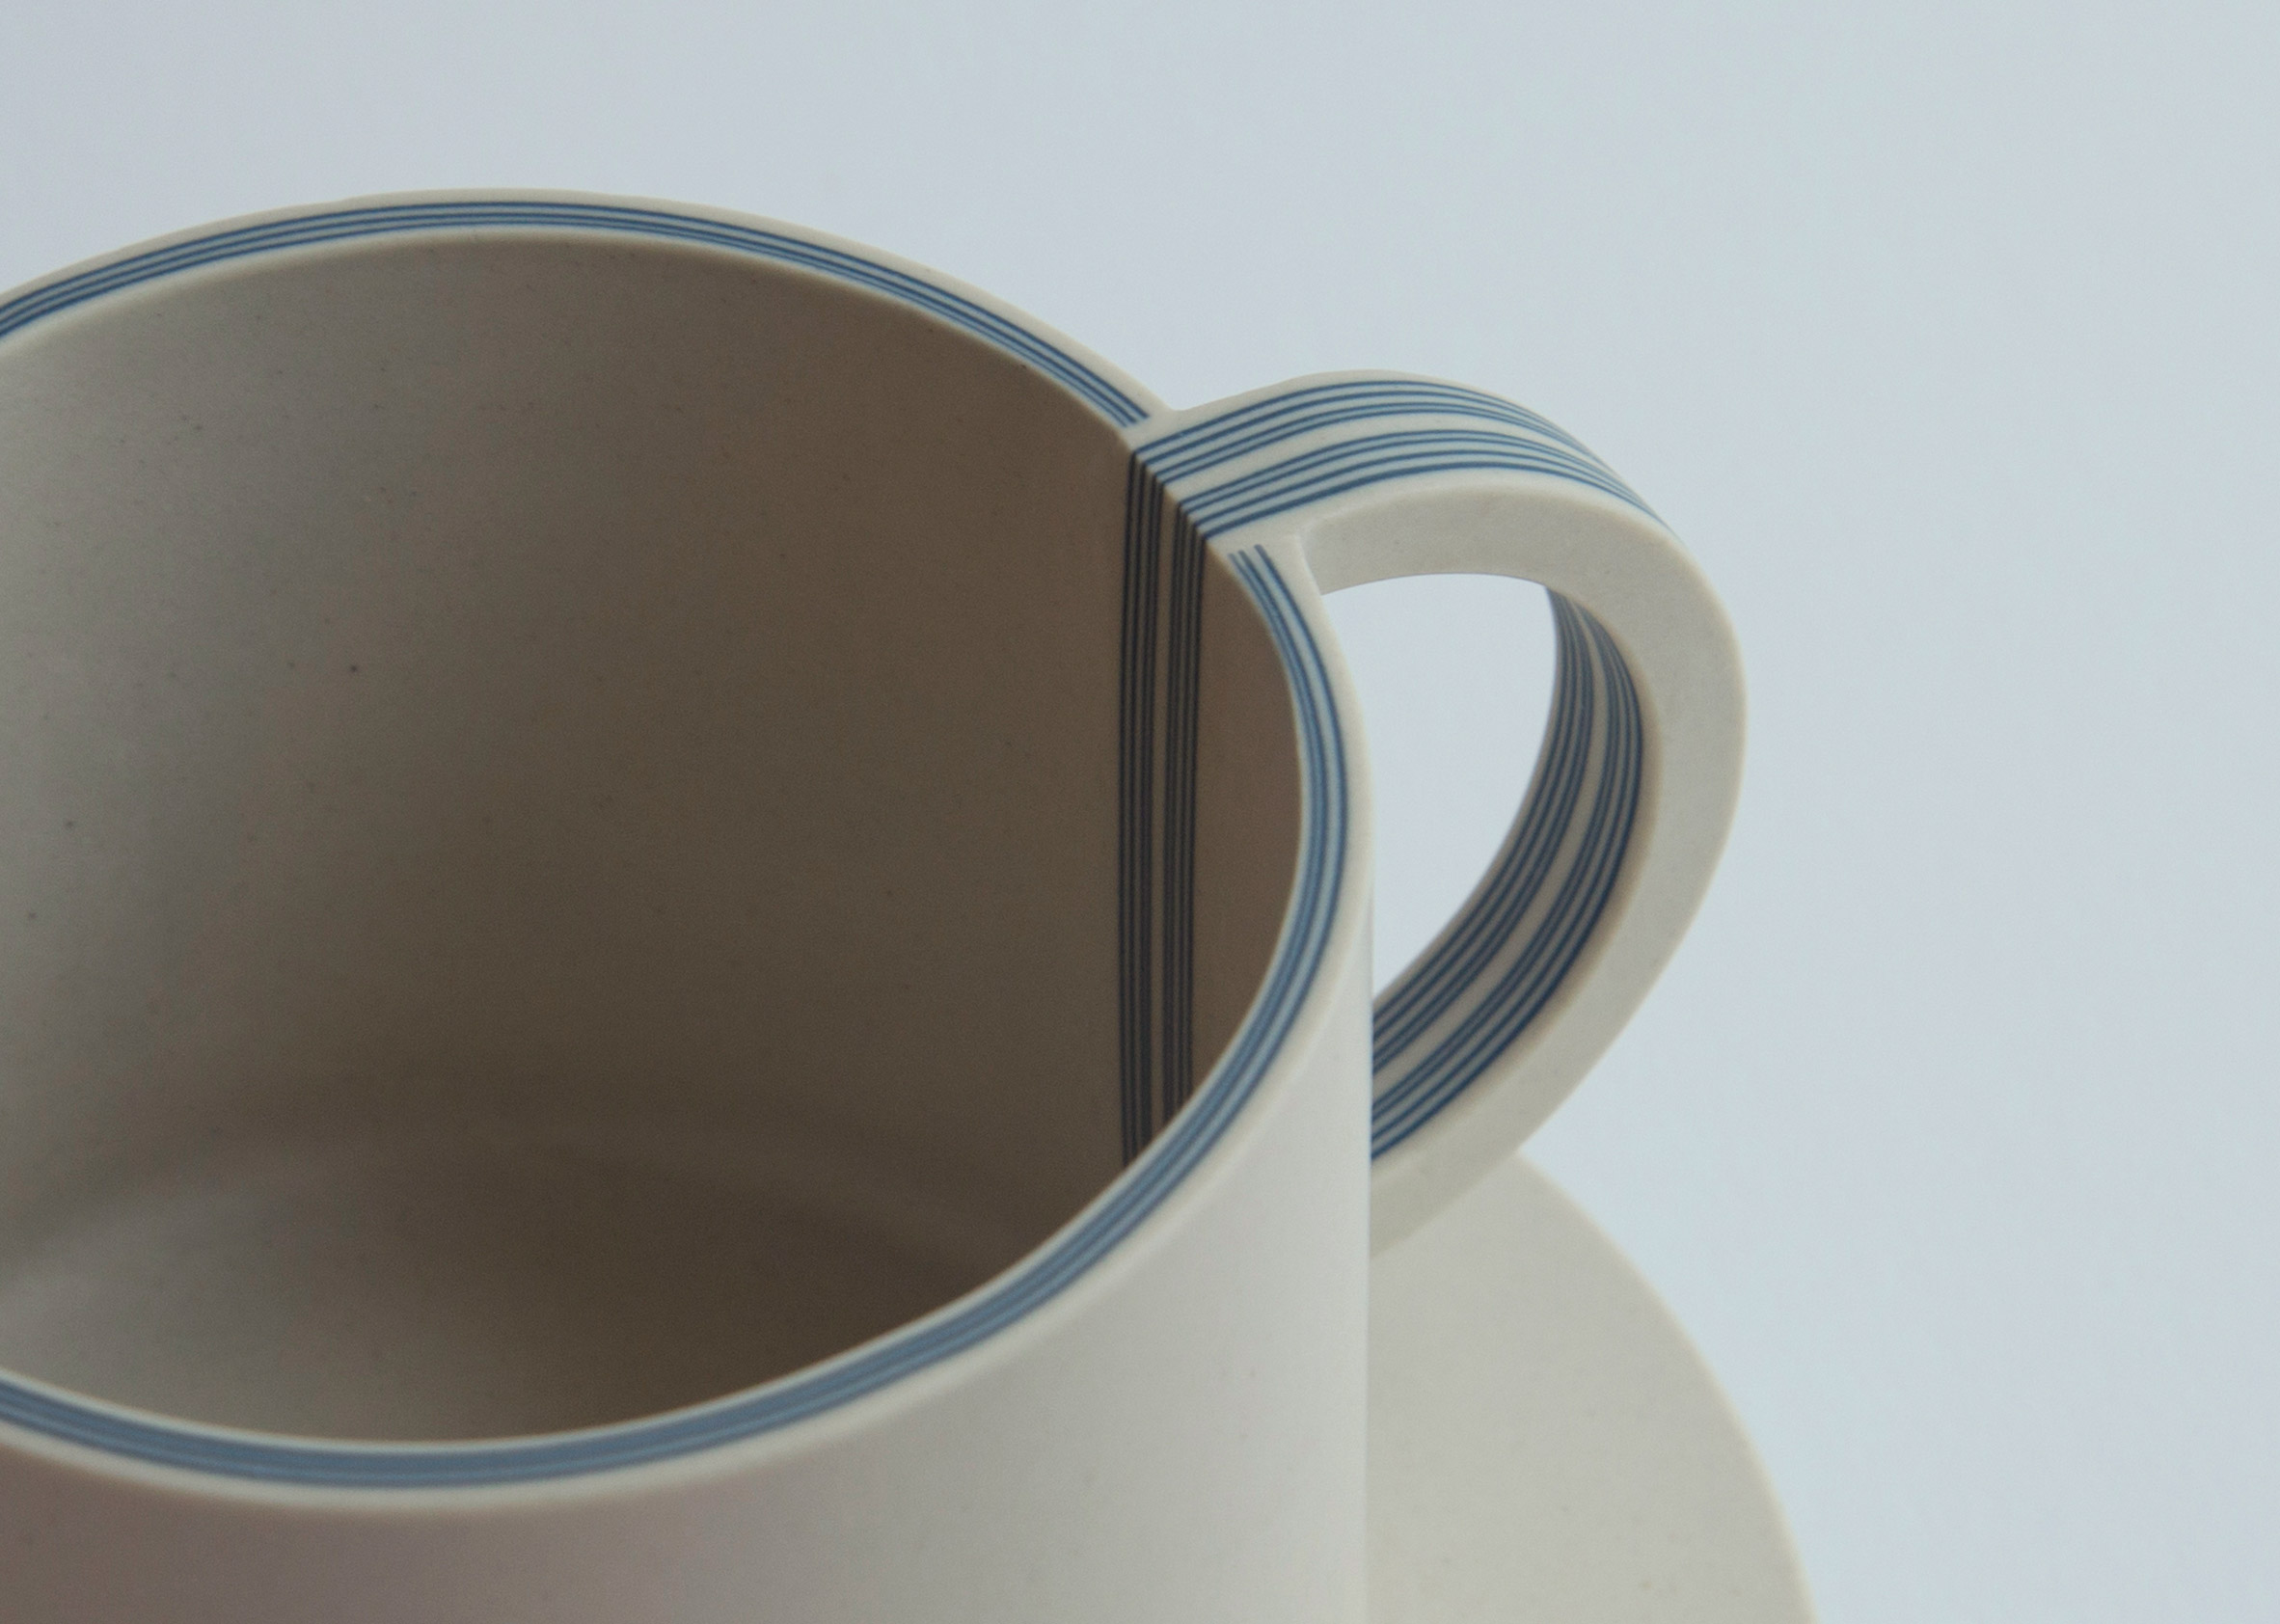 Yuting Chang turns blue-and-white porcelain inside out to make tableware